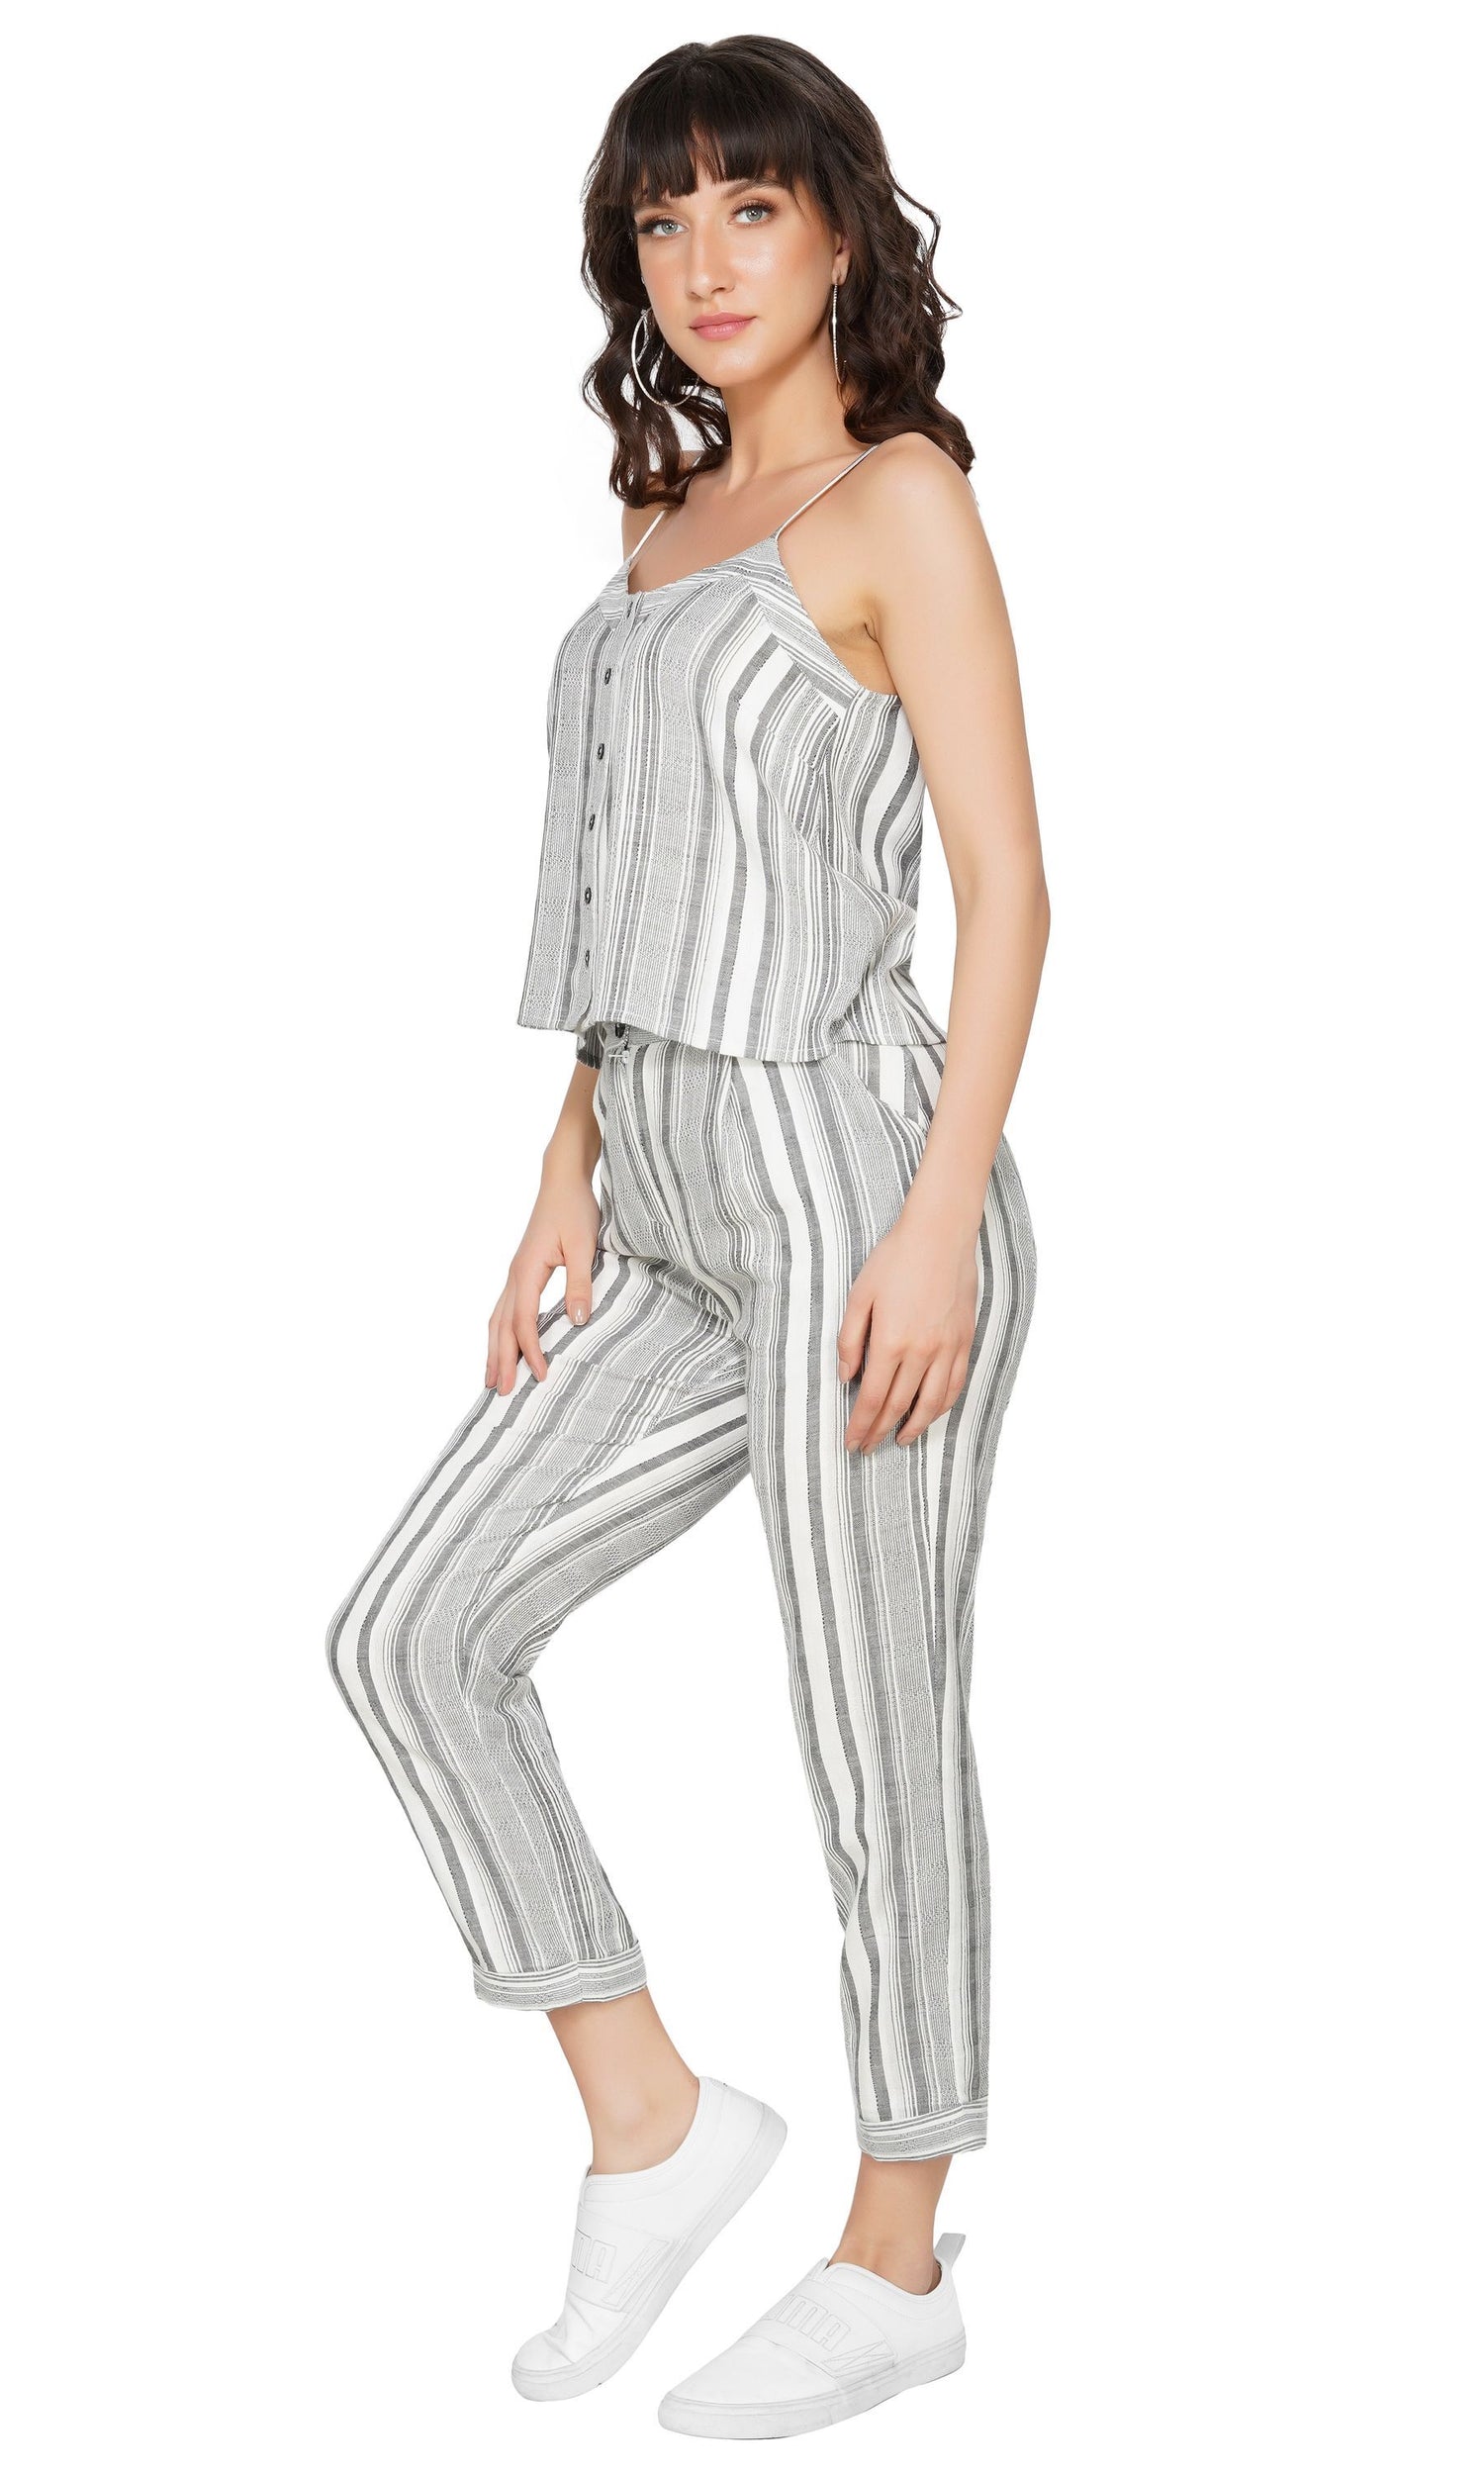 SLAY. Women's Yarn Dye Stripe Camisole And Pant Coord Set-clothing-to-slay.myshopify.com-Cami And Pant Set